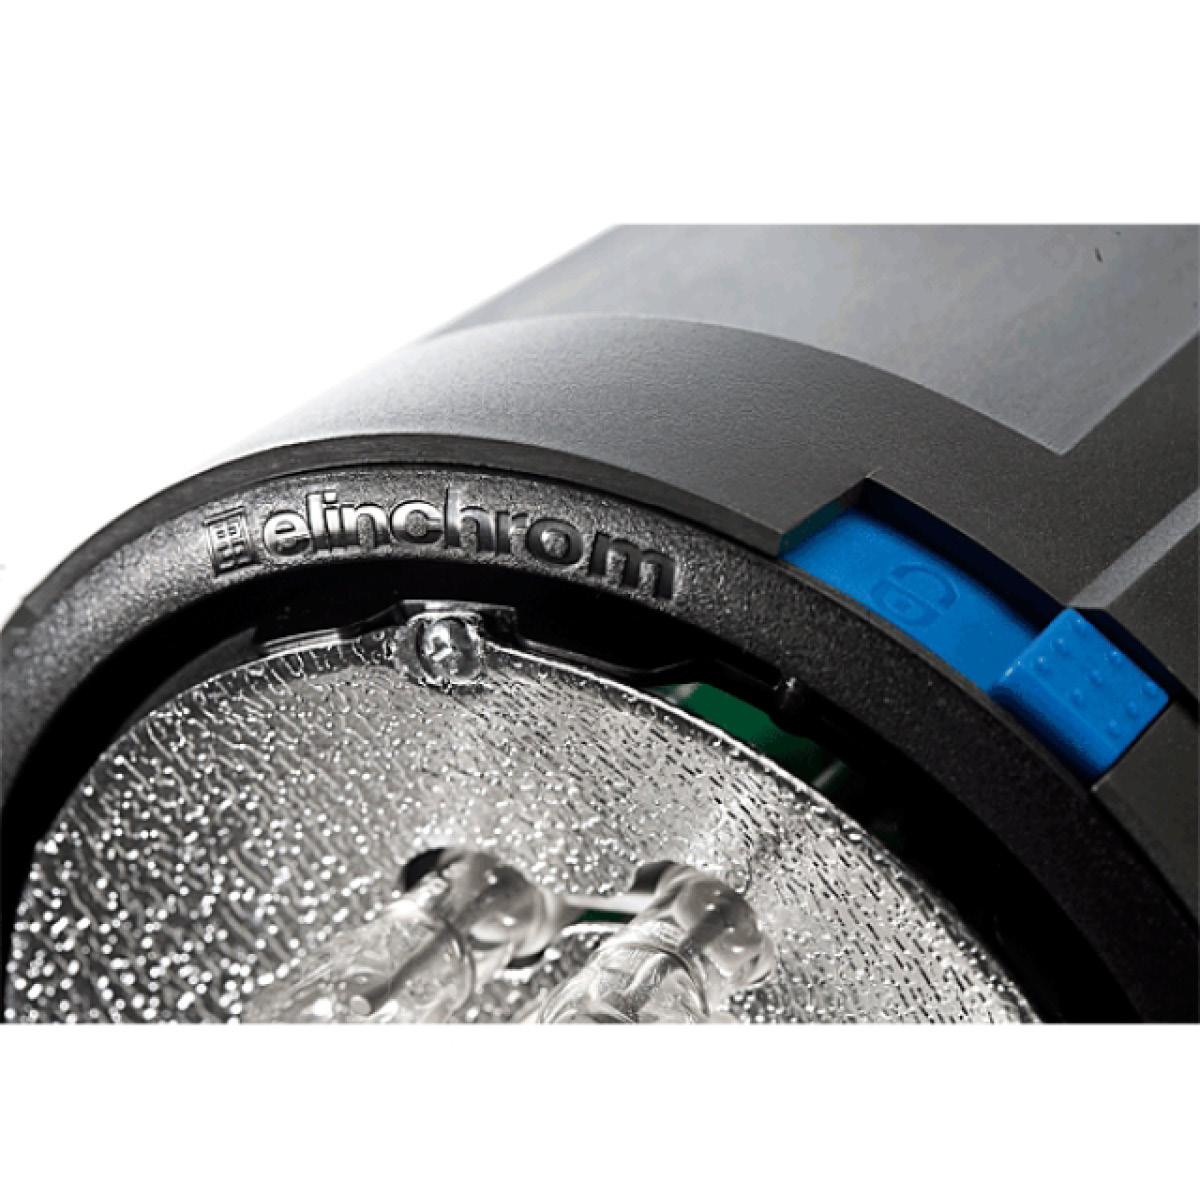 Elinchrom Compact D-Lite RX One